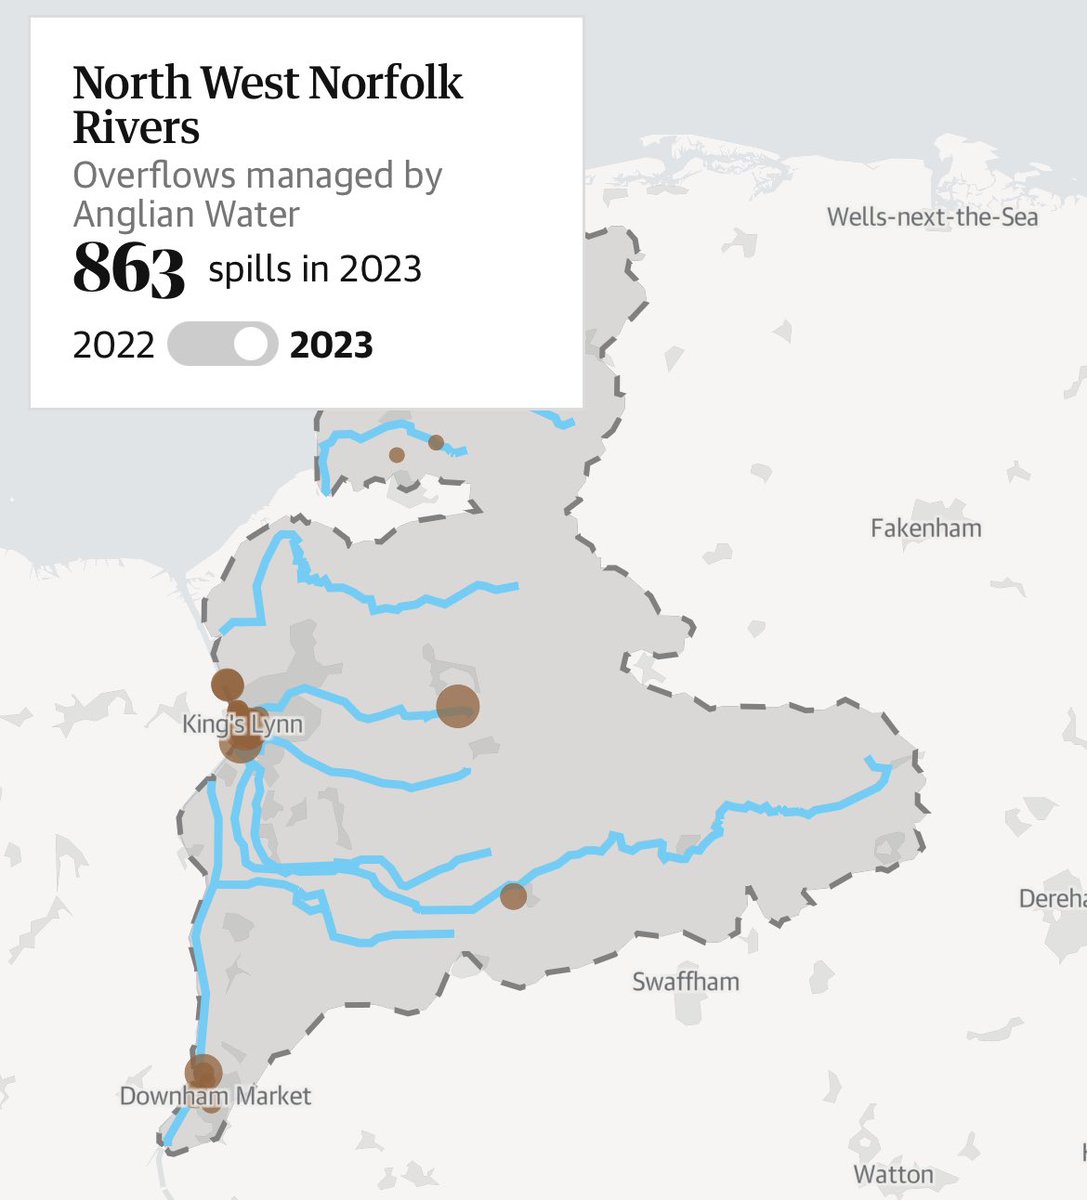 💩 863 sewer storm overflow dumps in #NorthWestNorfolk last year. Why have water companies given our payments to shareholders & boss bonuses, rather than update infrastructure to prepare for more housing and climate change? Poor regulation by government & OFWAT. Unacceptable.